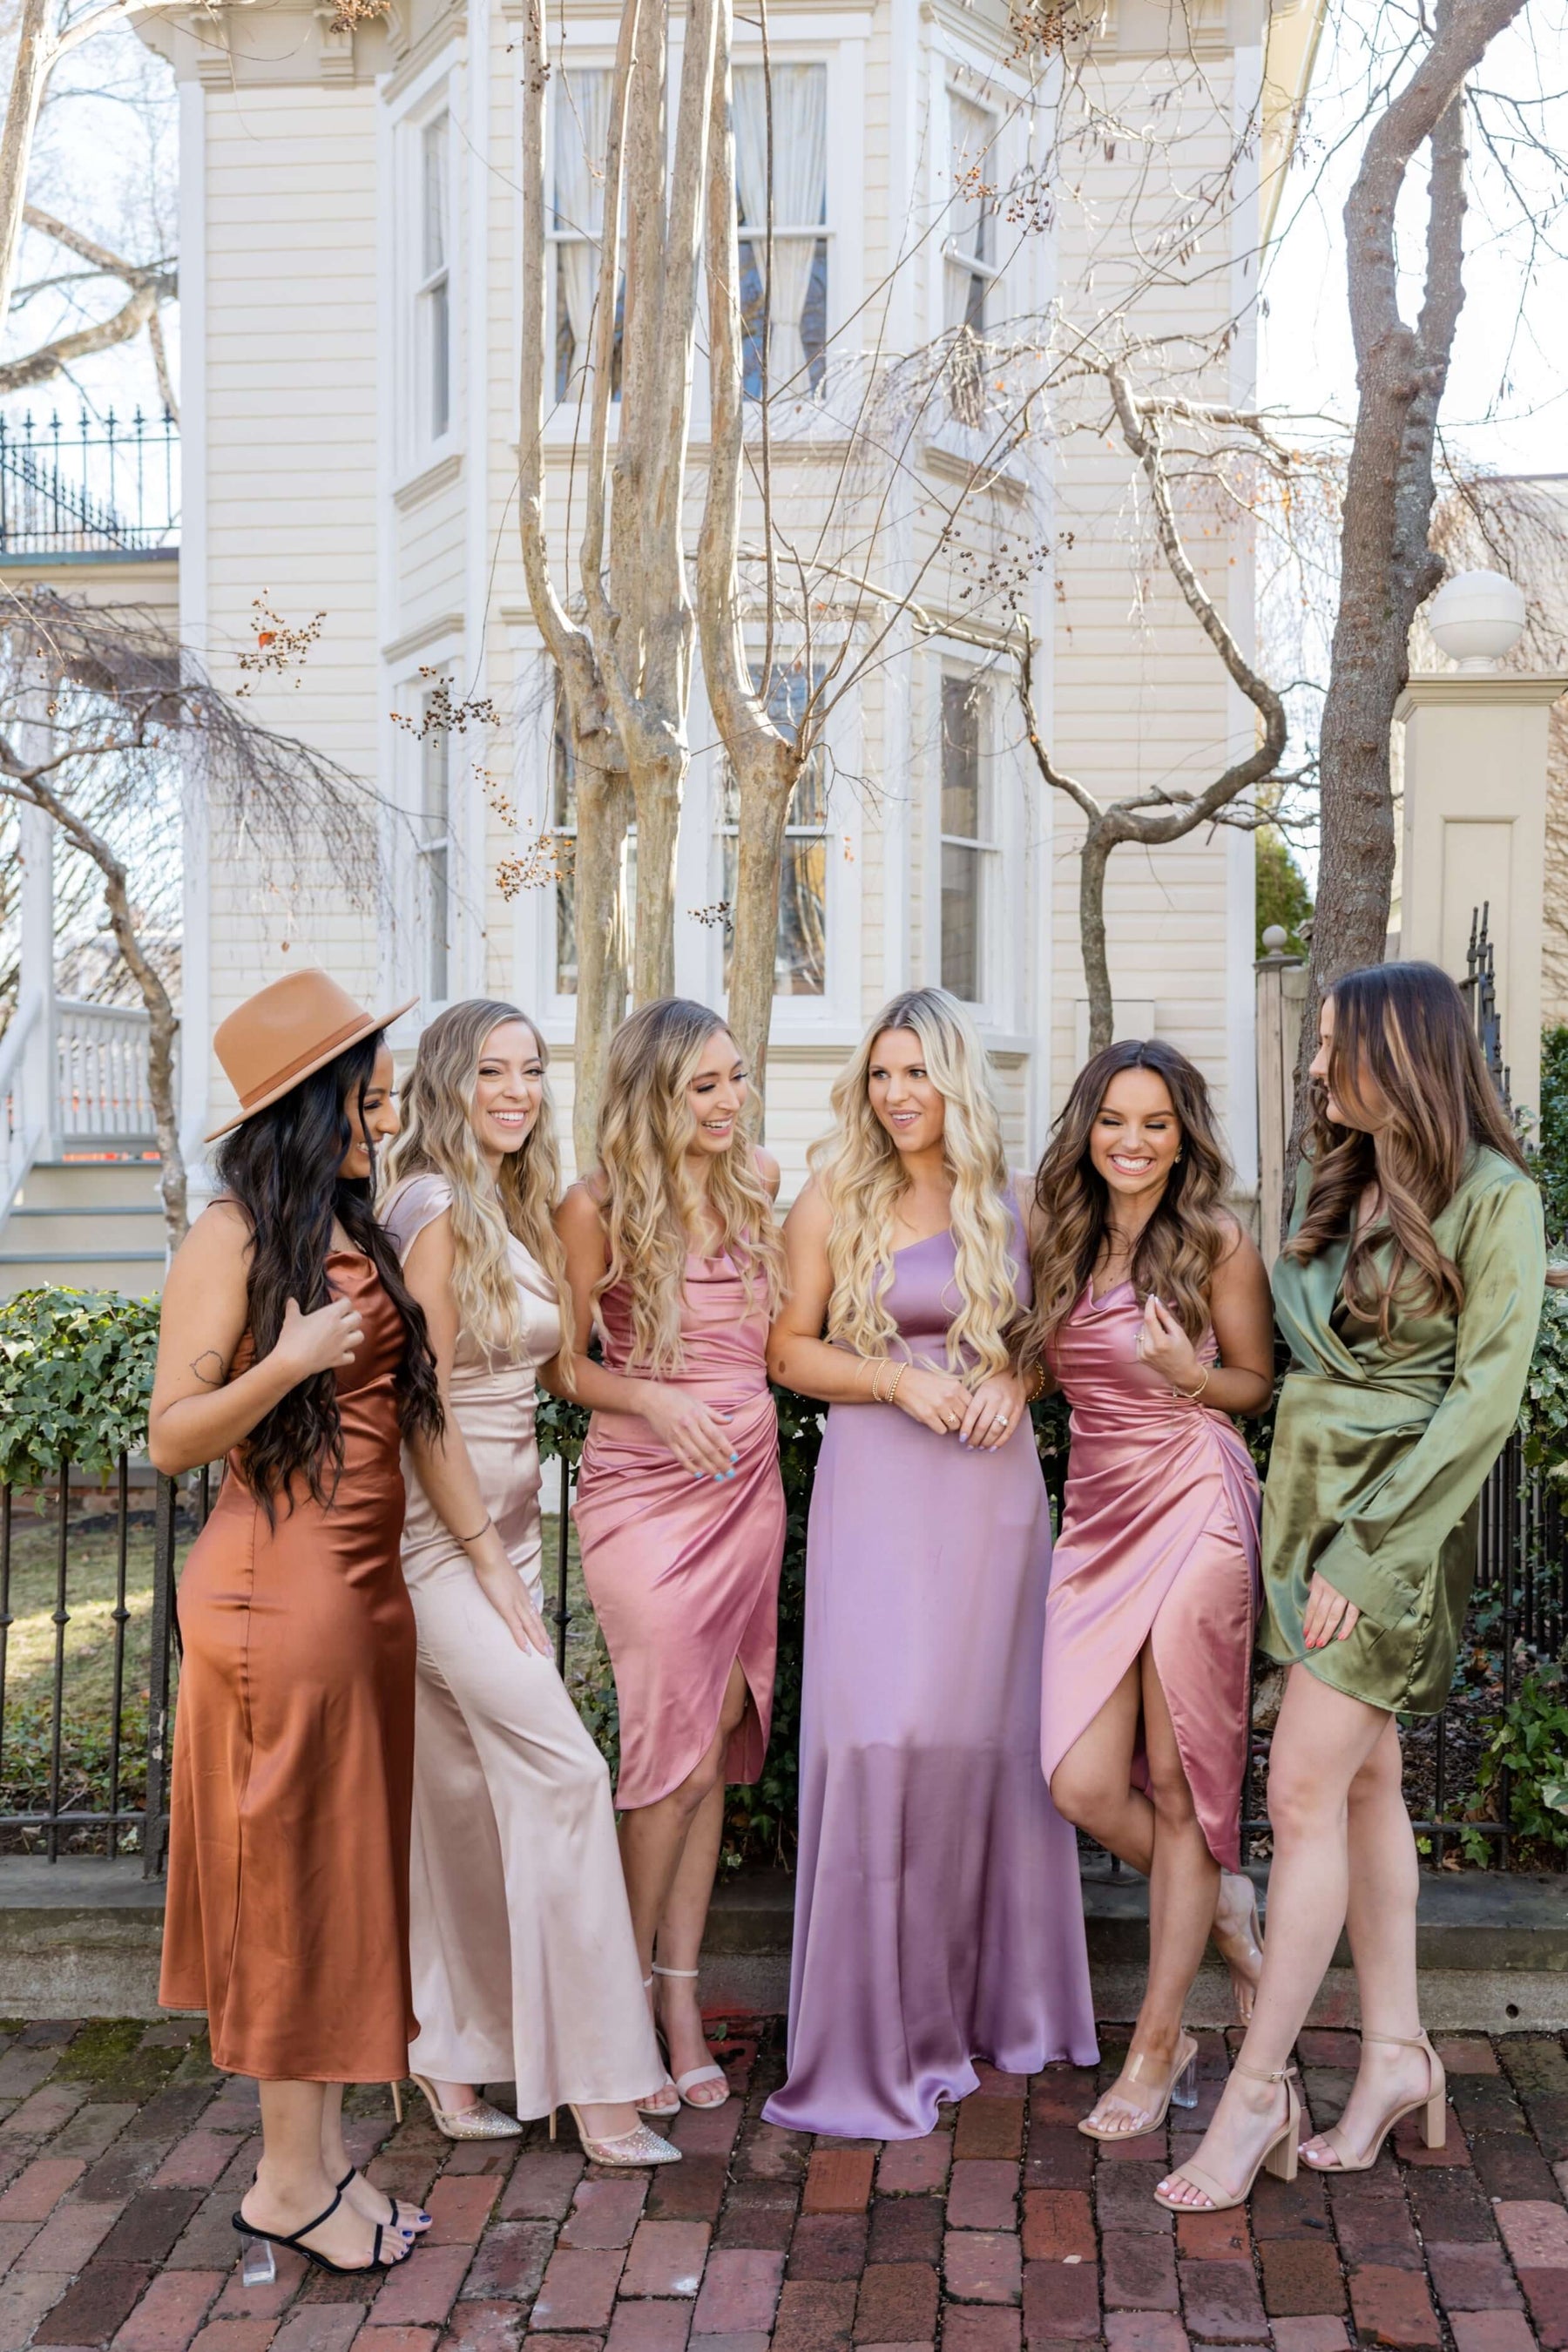 Wedding hair extensions for bridesmaids